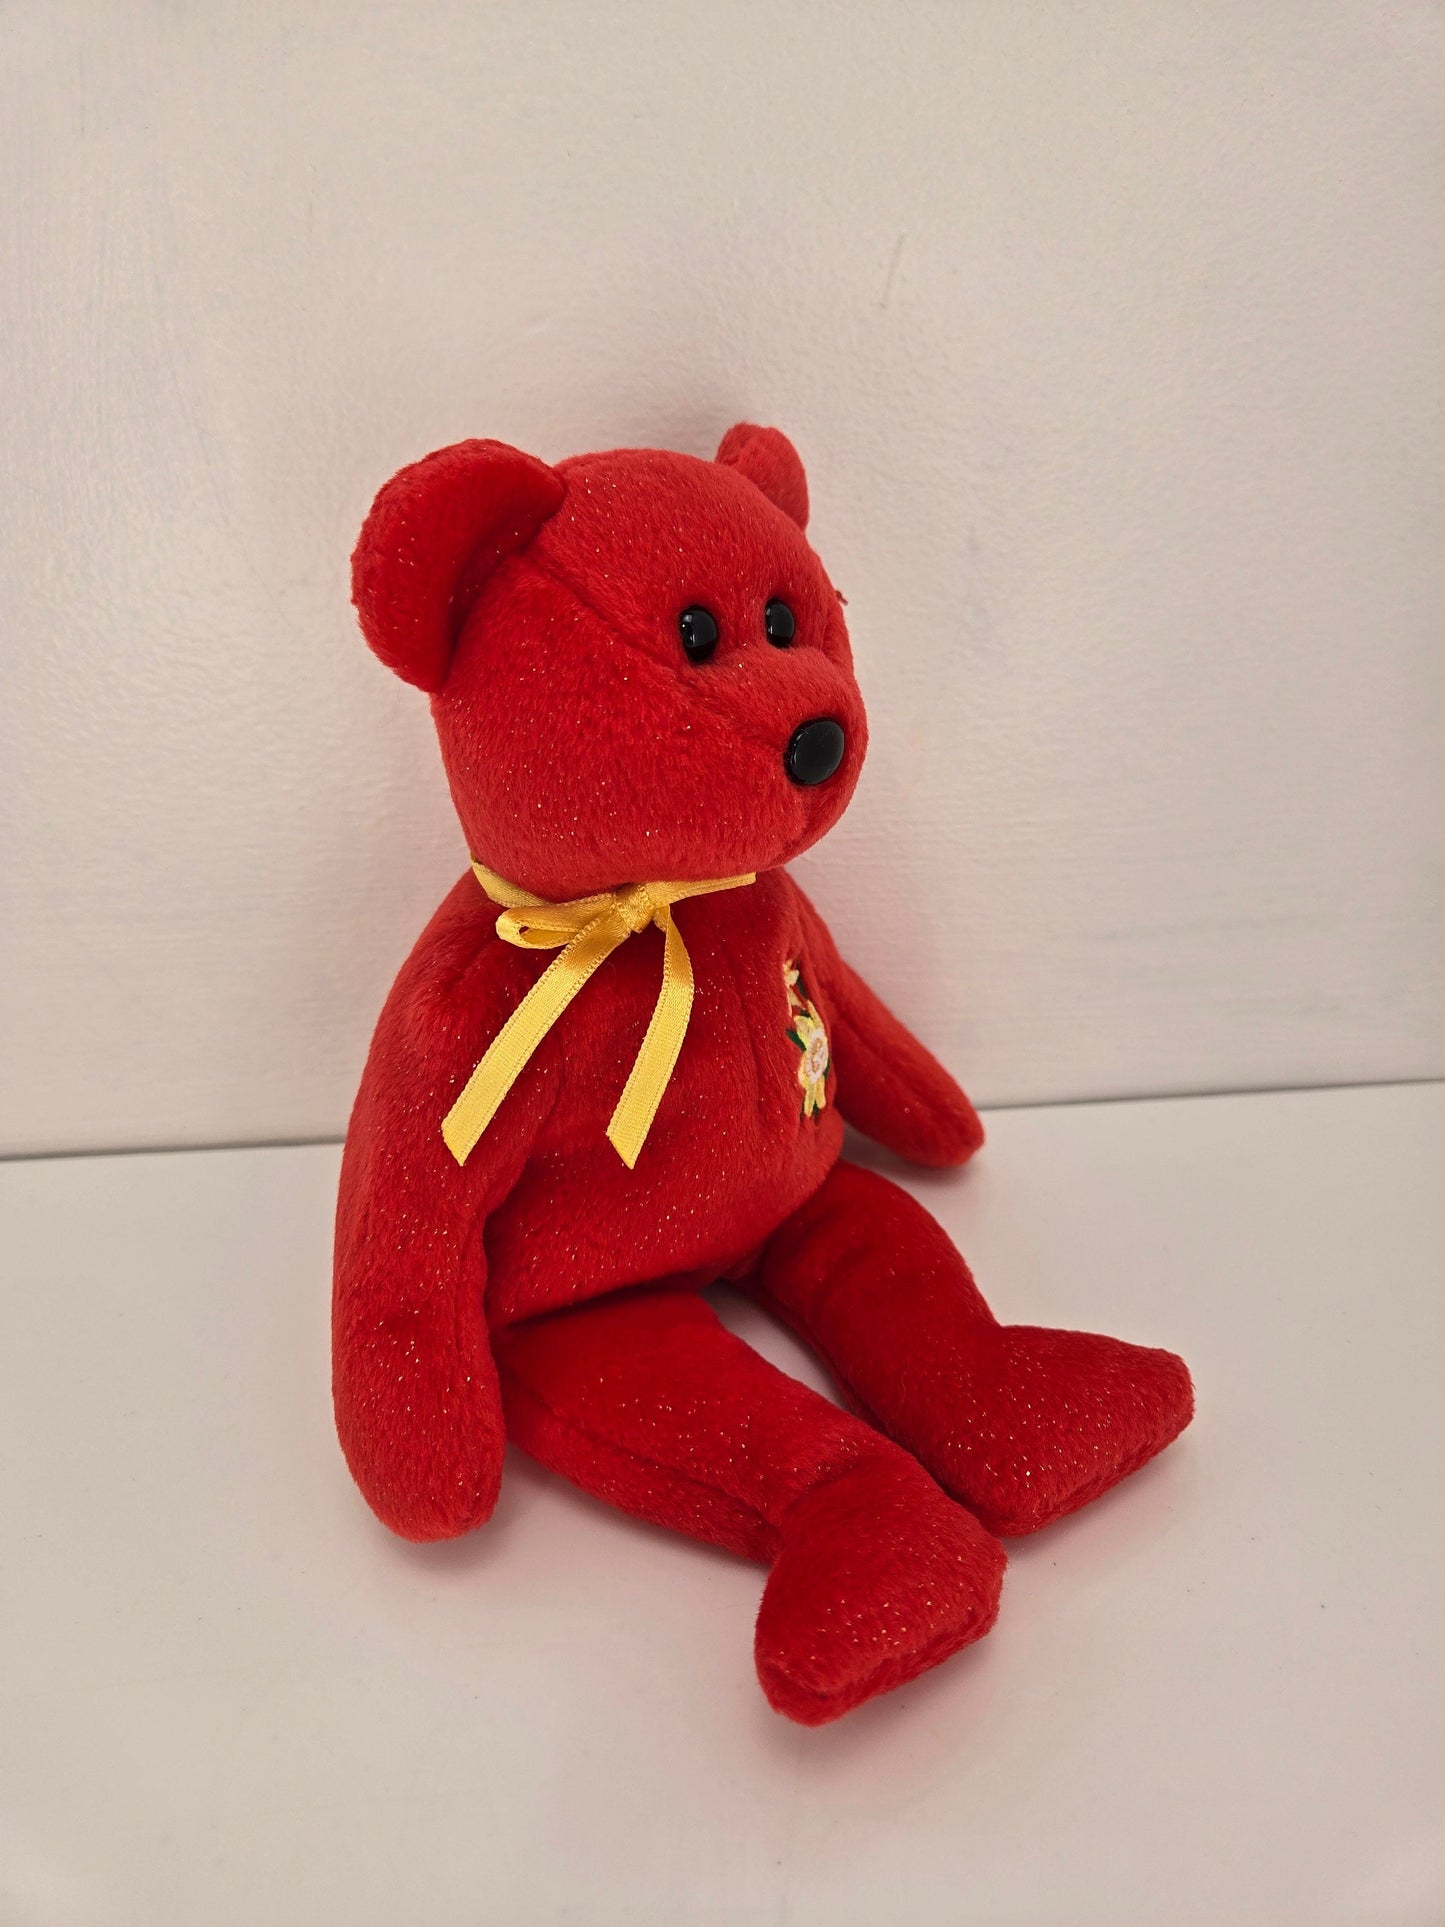 Ty Beanie Baby “Daffodil” the Red Bear - UK Exclusive (8.5 inch)